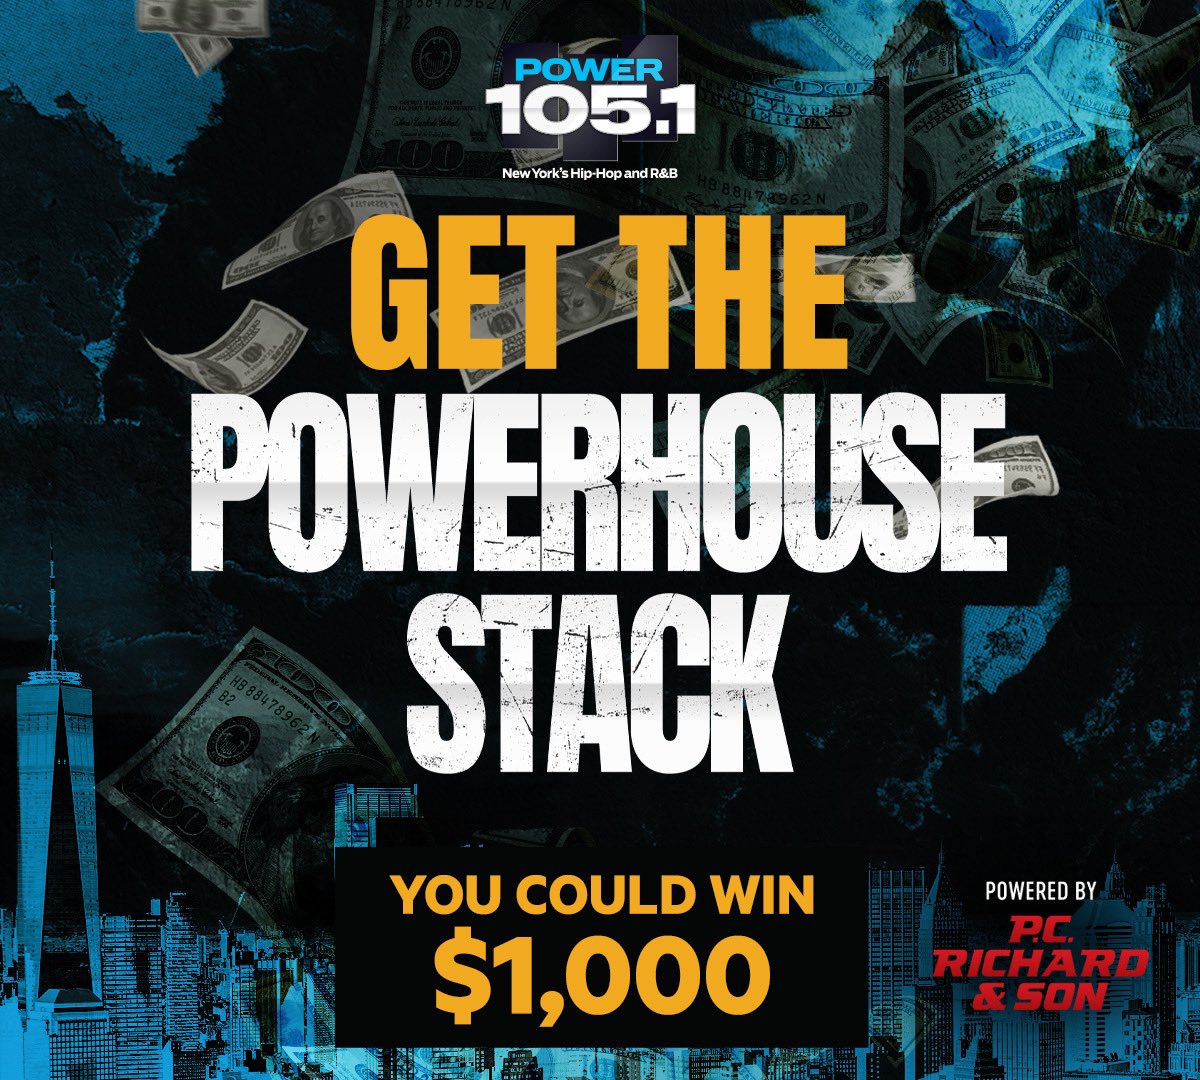 Who needs a quick $1,000⁉️ 🤑💸 Well we got your #POWERHOUSESTACK 💵💰 LISTEN live 🤳🏽🎶 at power1051fm.com/listen for the keyword 🔑 4X a day weekdays at :10 past the hour between 9A-5P ⏰ For your chance to win that 💲1K 💰🏆 #POWERHOUSENYC  - Powered by @PCRichardandSon 📺